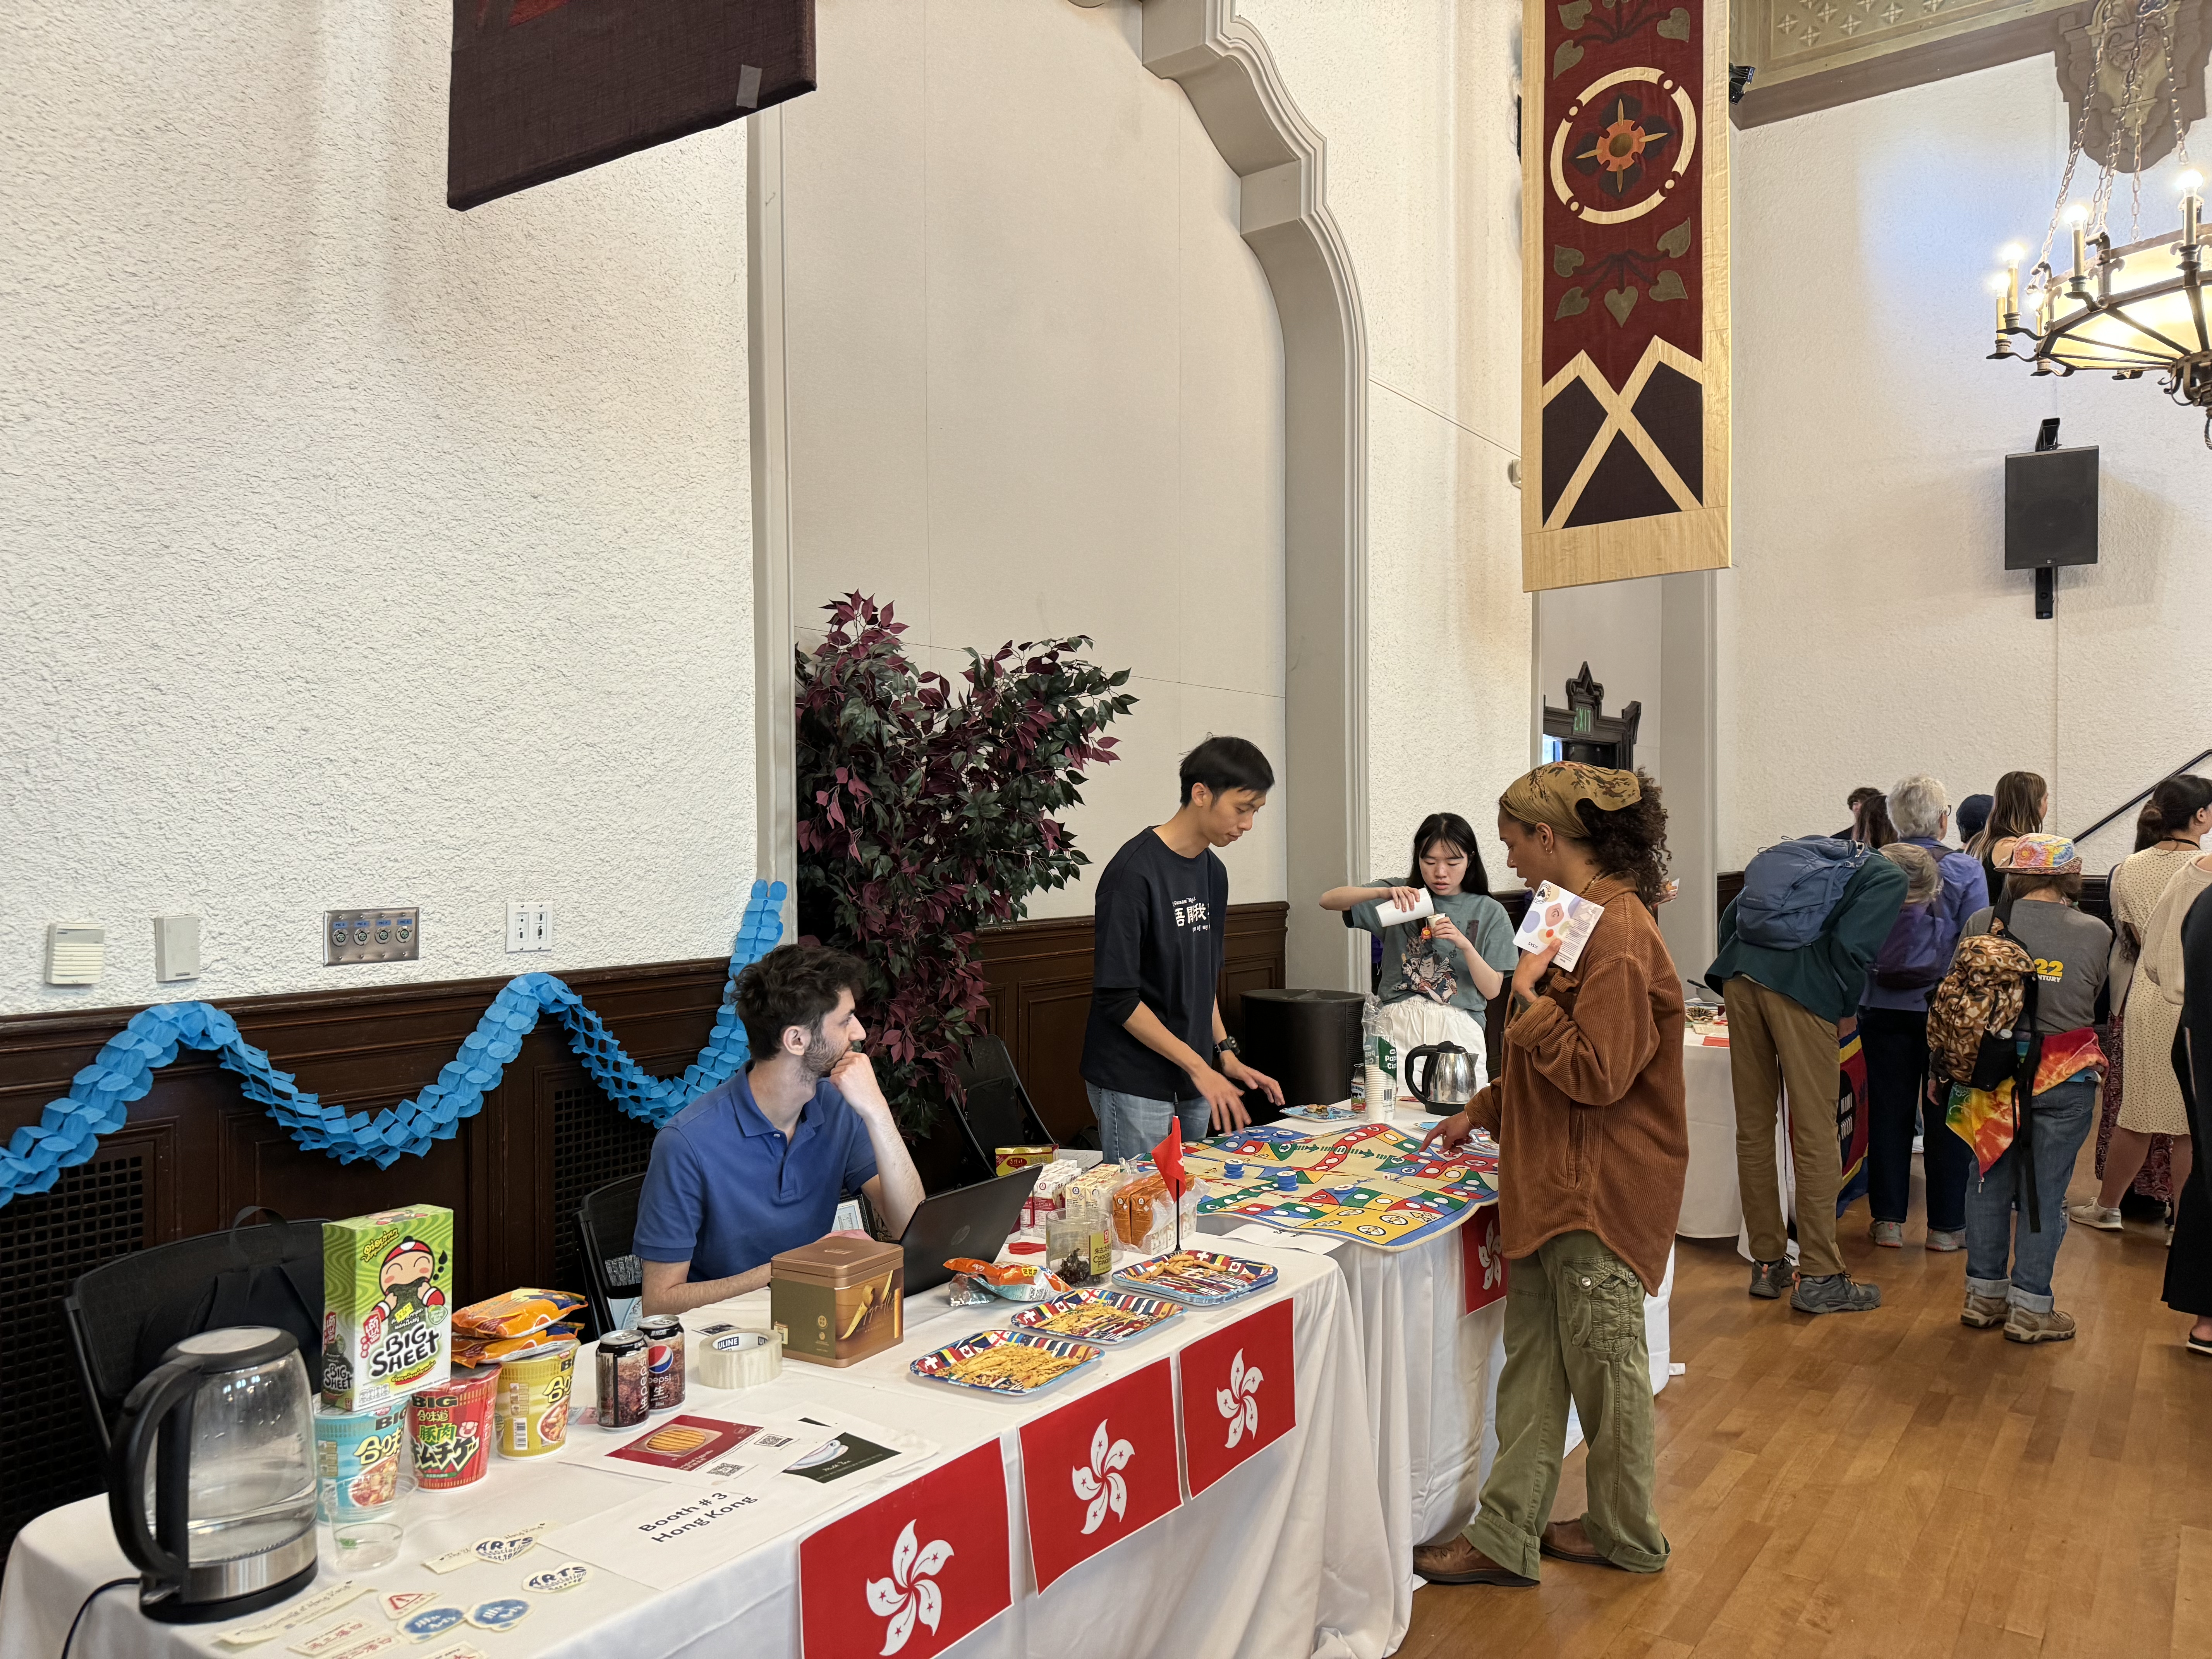 A group of stalls for the International Cultural Festival.